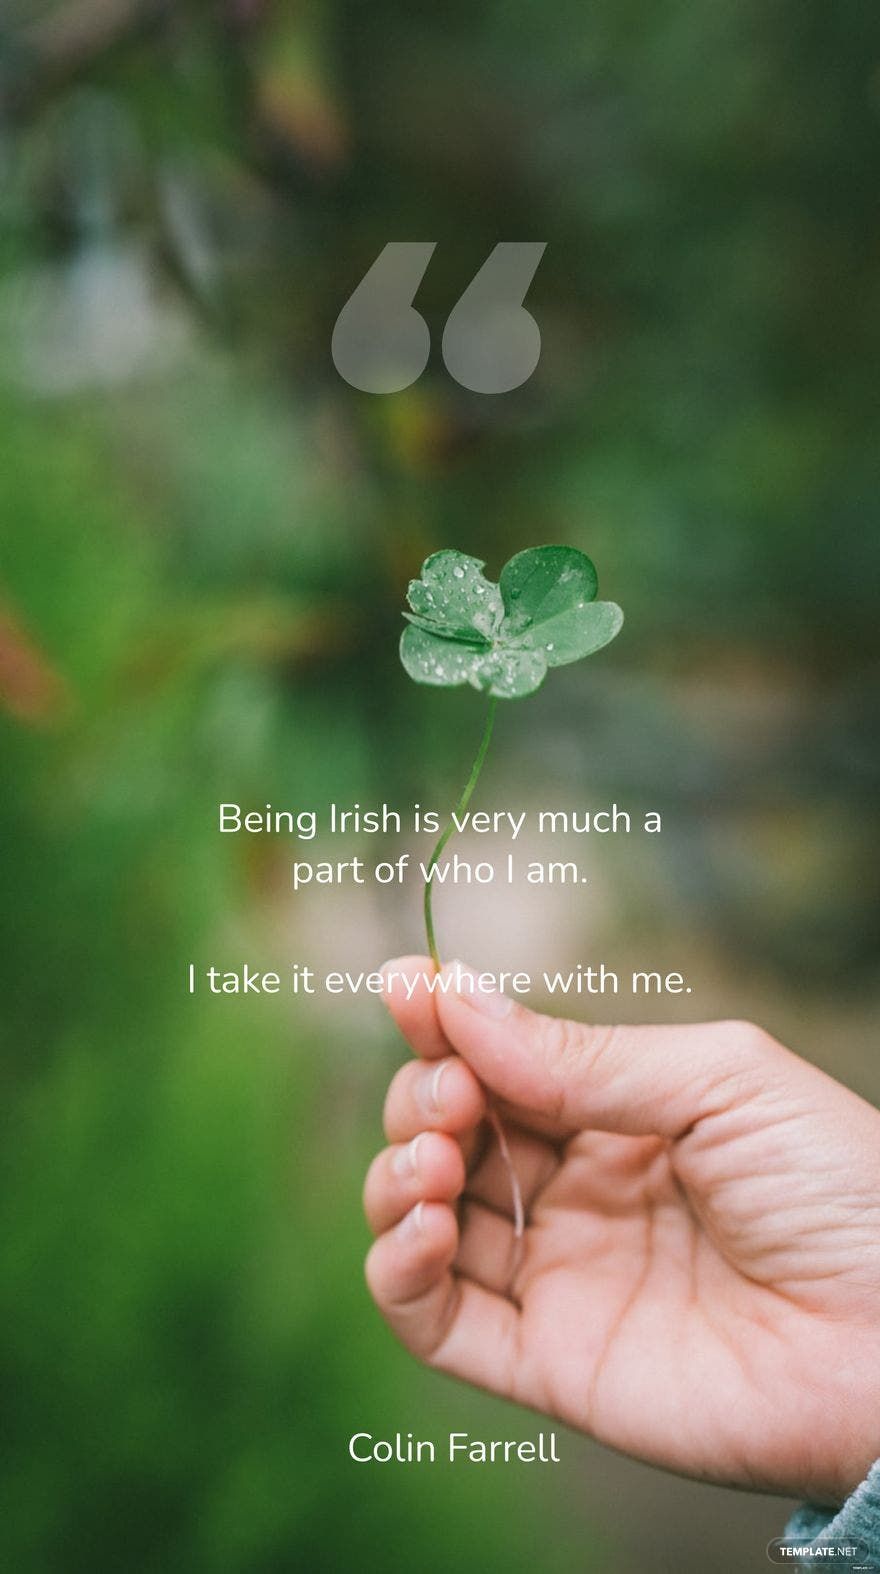 Colin Farrell - Being Irish is very much a part of who I am. I take it everywhere with me.